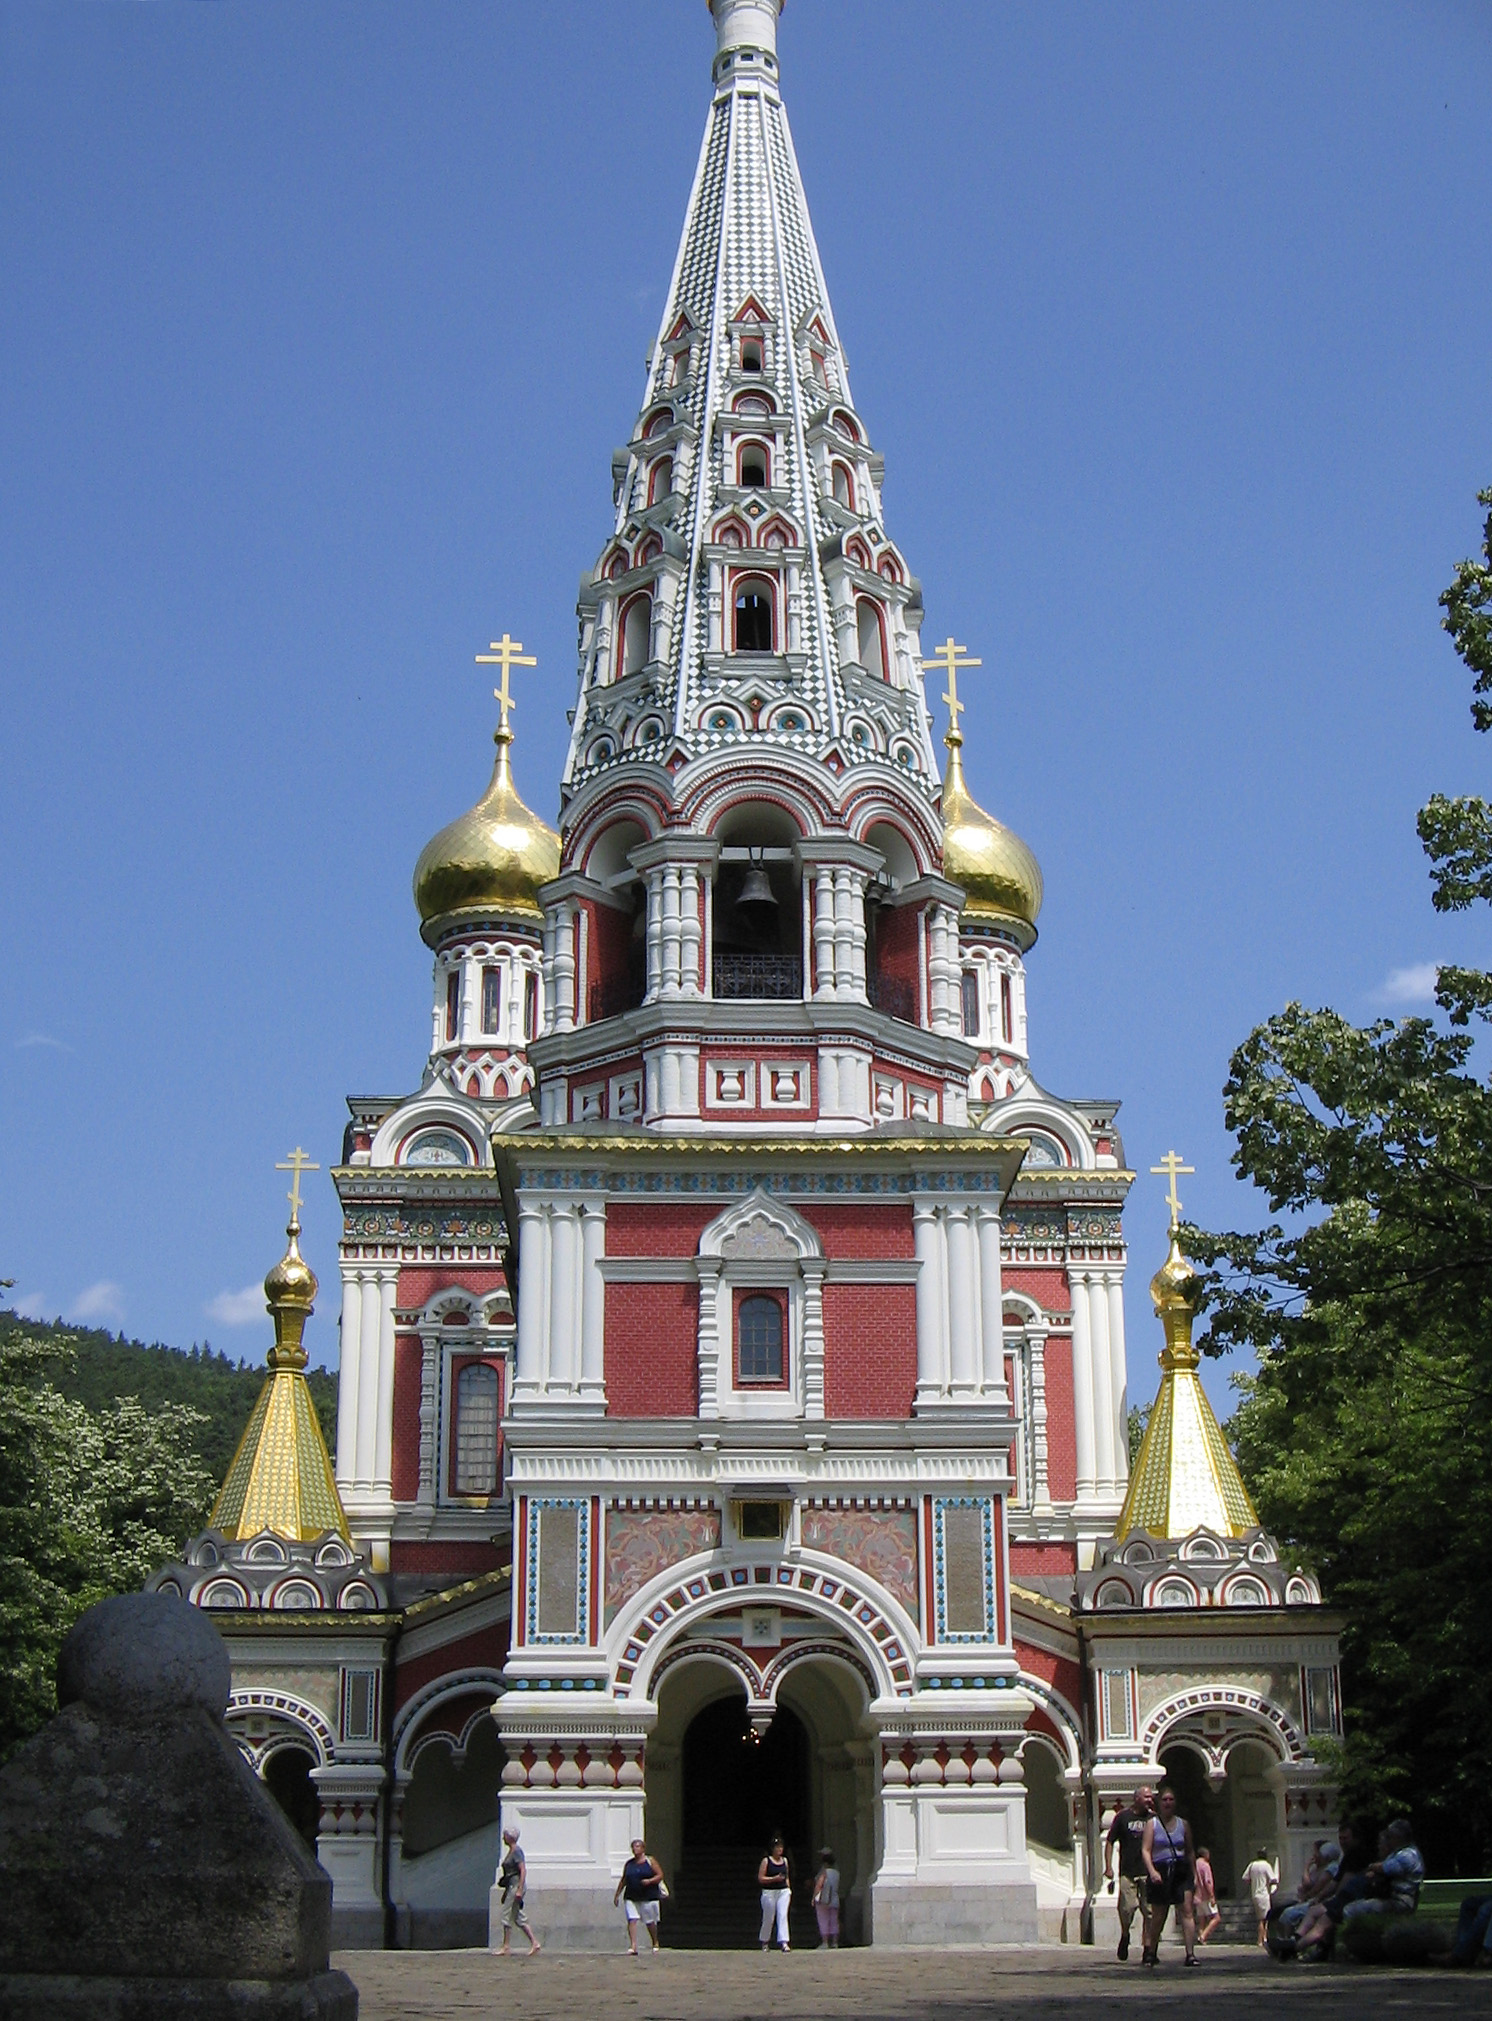 The Fascinating Blend of Religion and History at Shipka Monastery